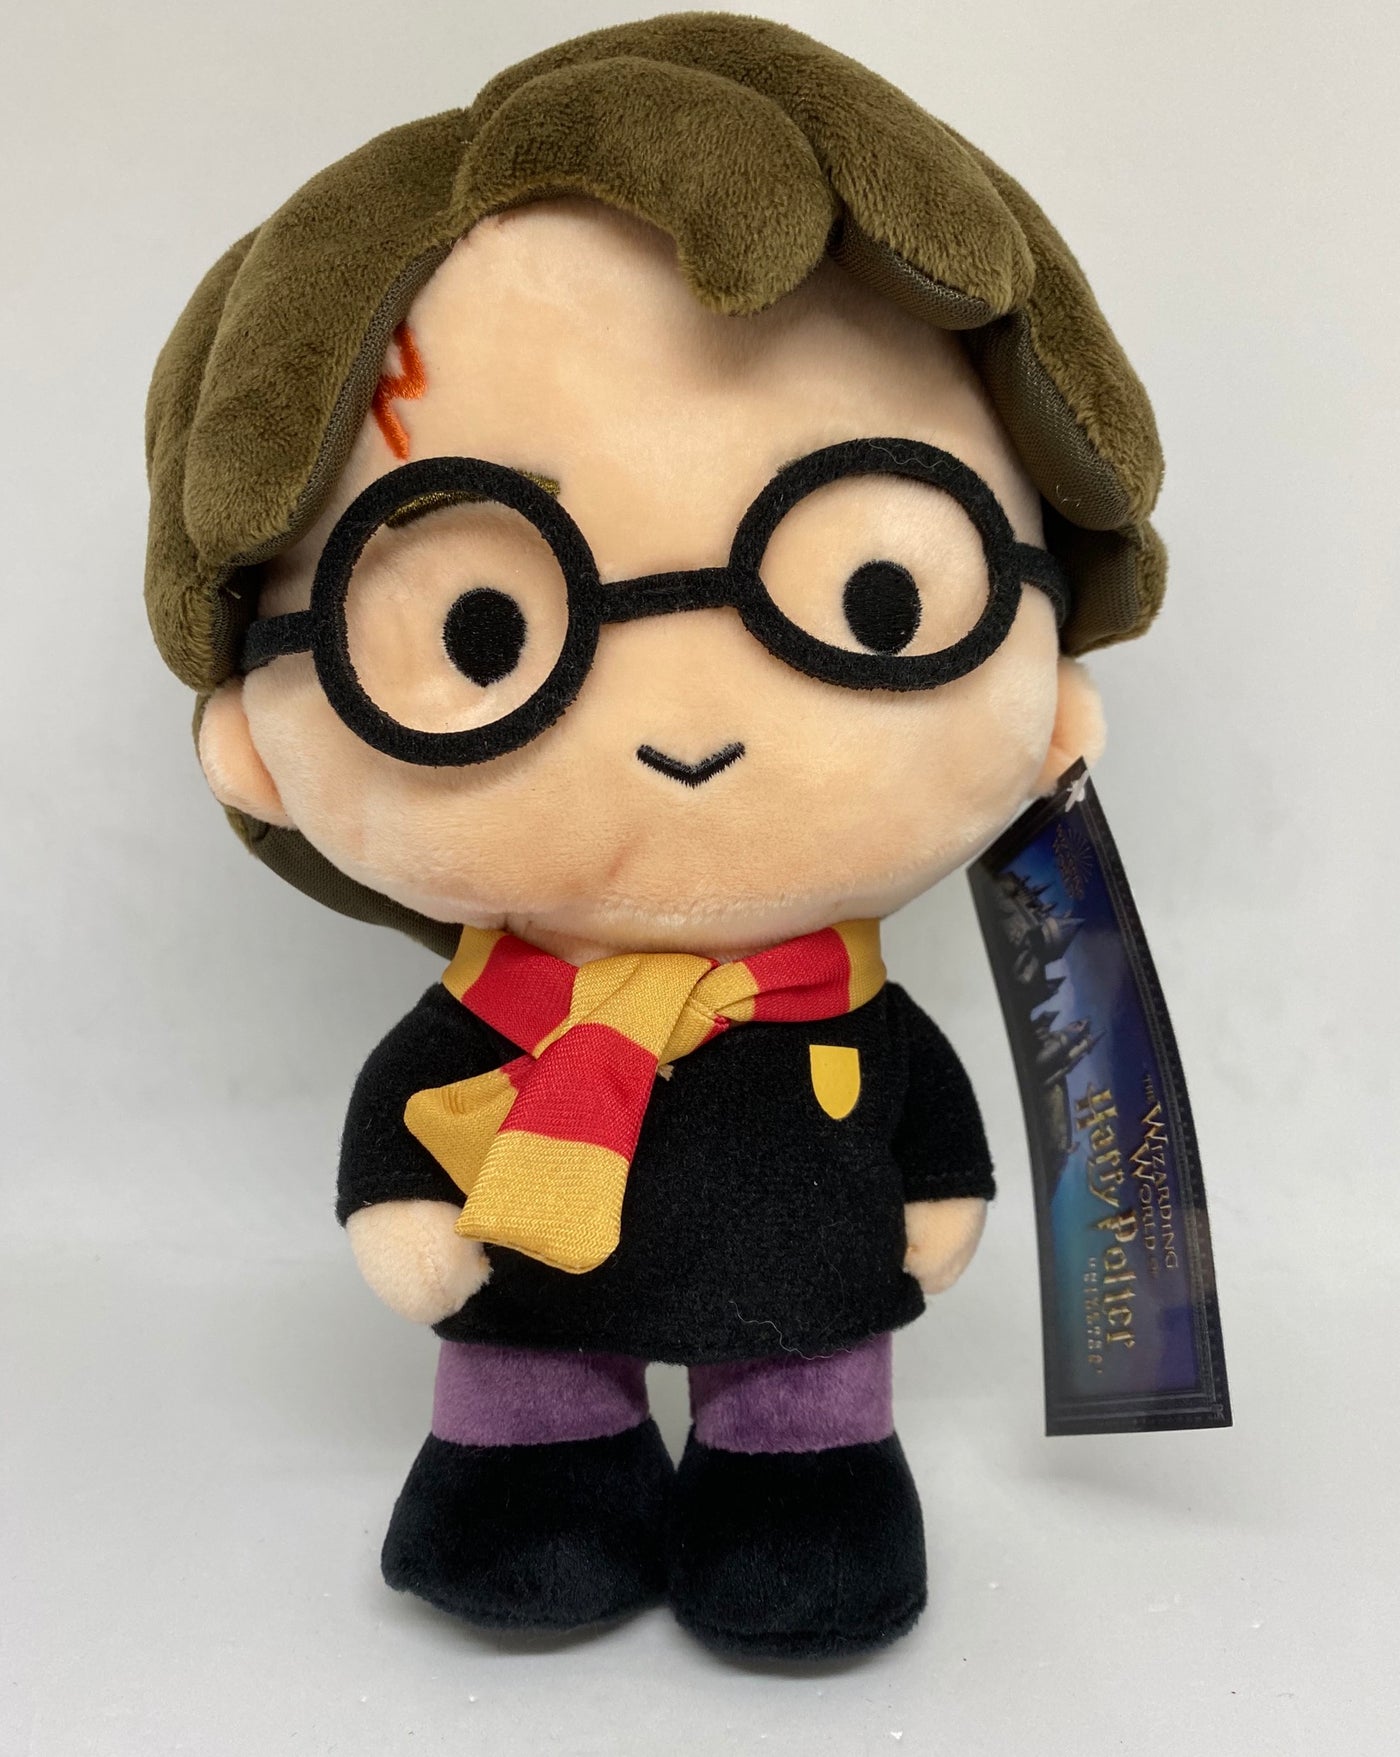 Universal Studios Wizarding World of Harry Potter Cutie Plush New with Tag